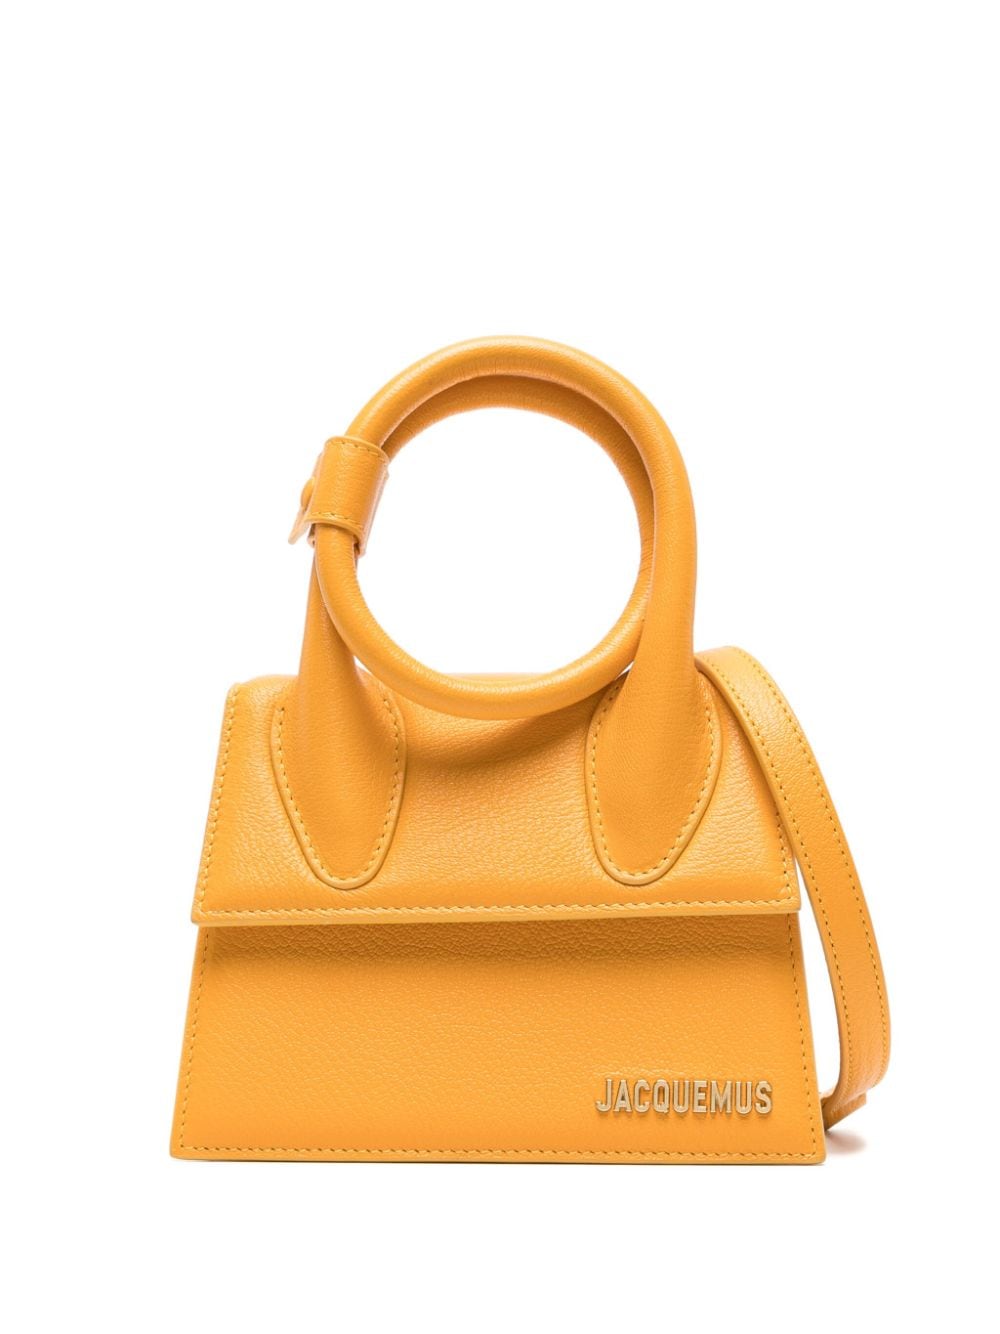 Jacquemus Amber Orange Leather Handbag With Grained Texture And Gold-tone Details For Women